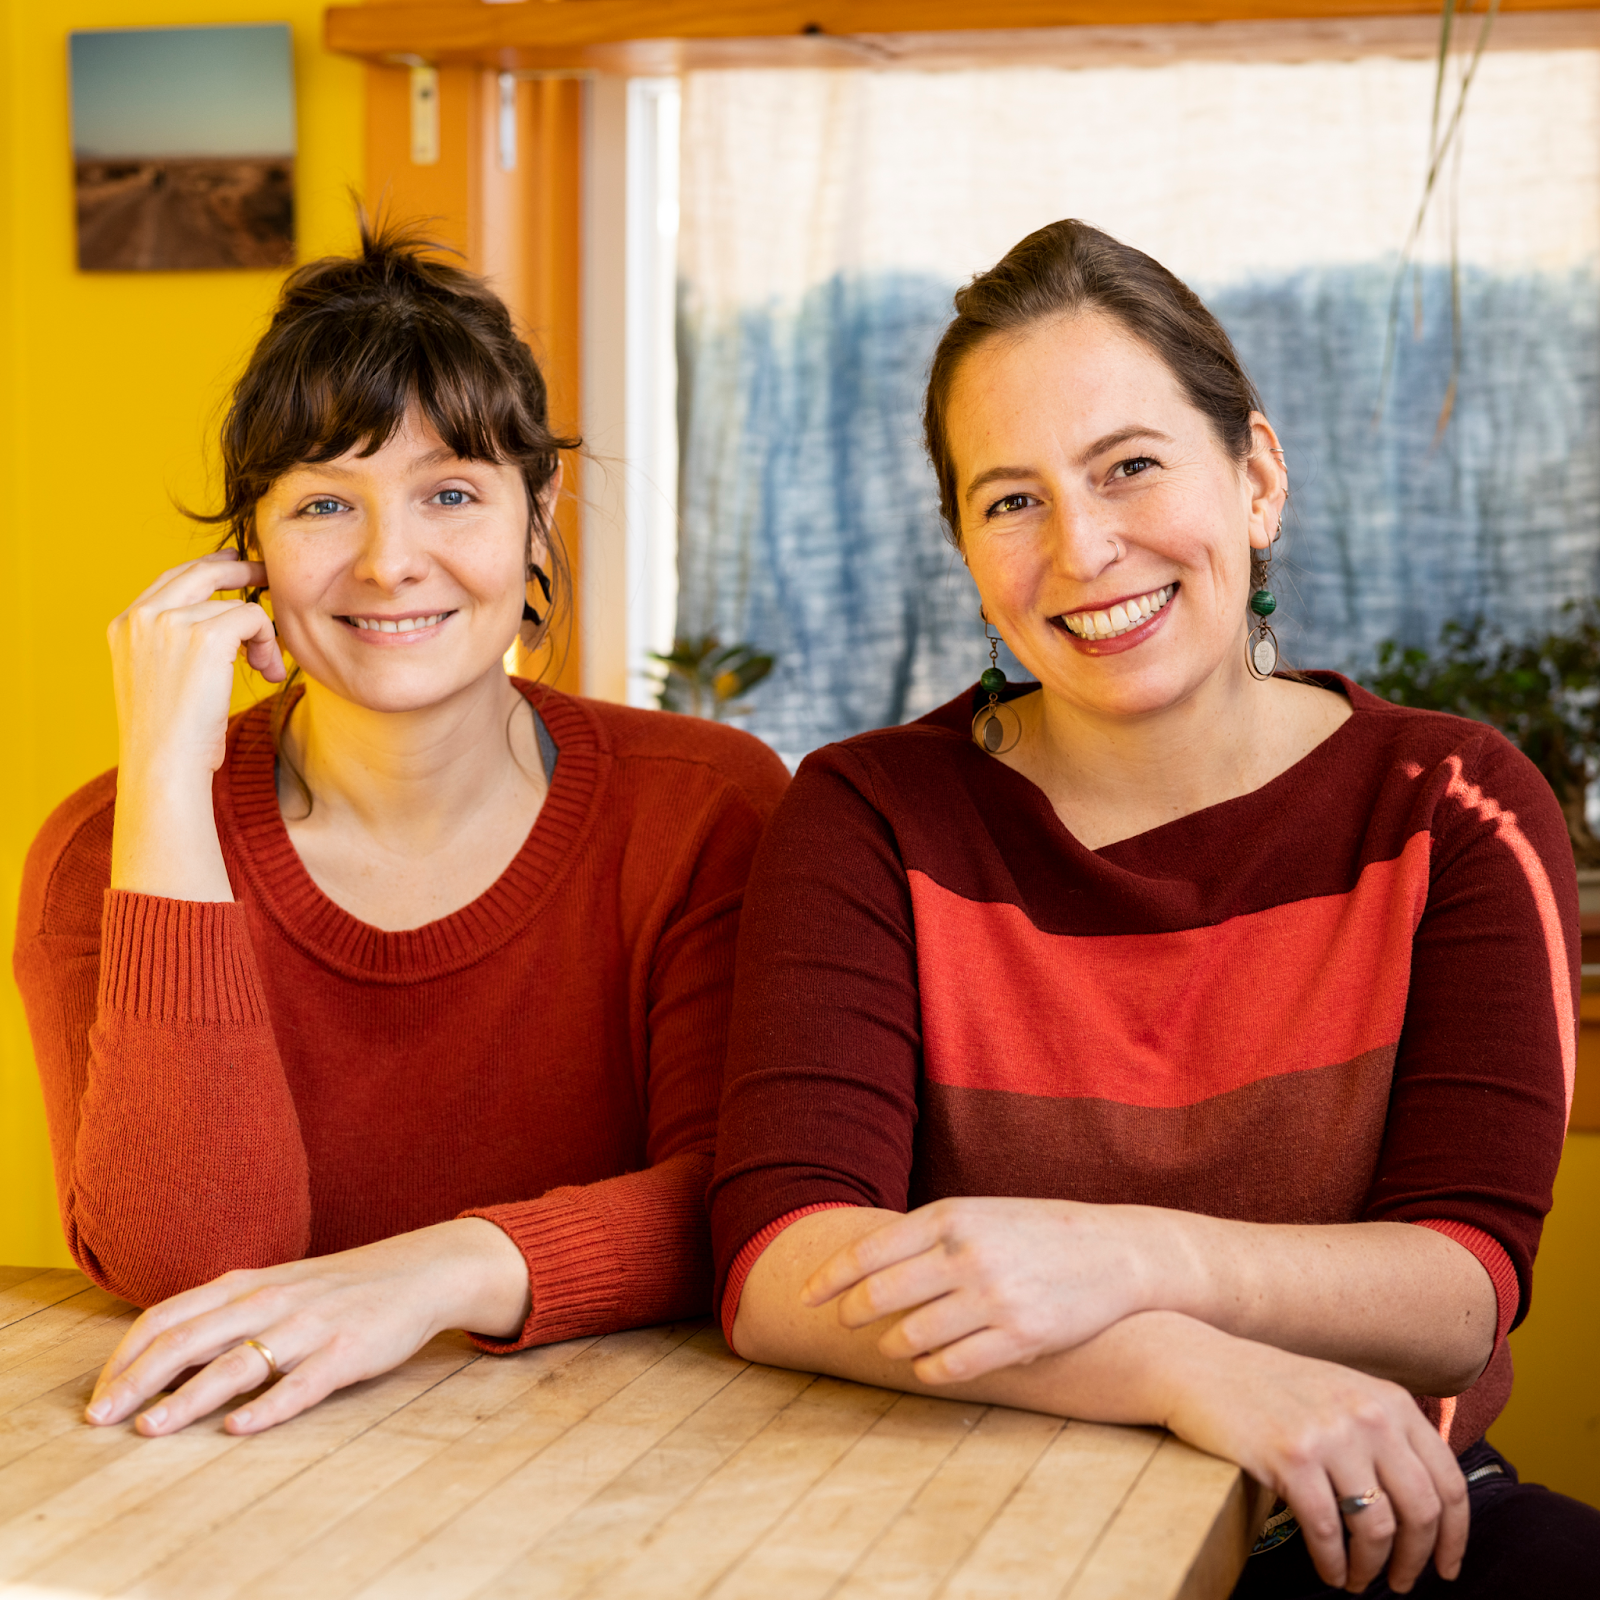 A photo of two women sitting at a table and smiling.